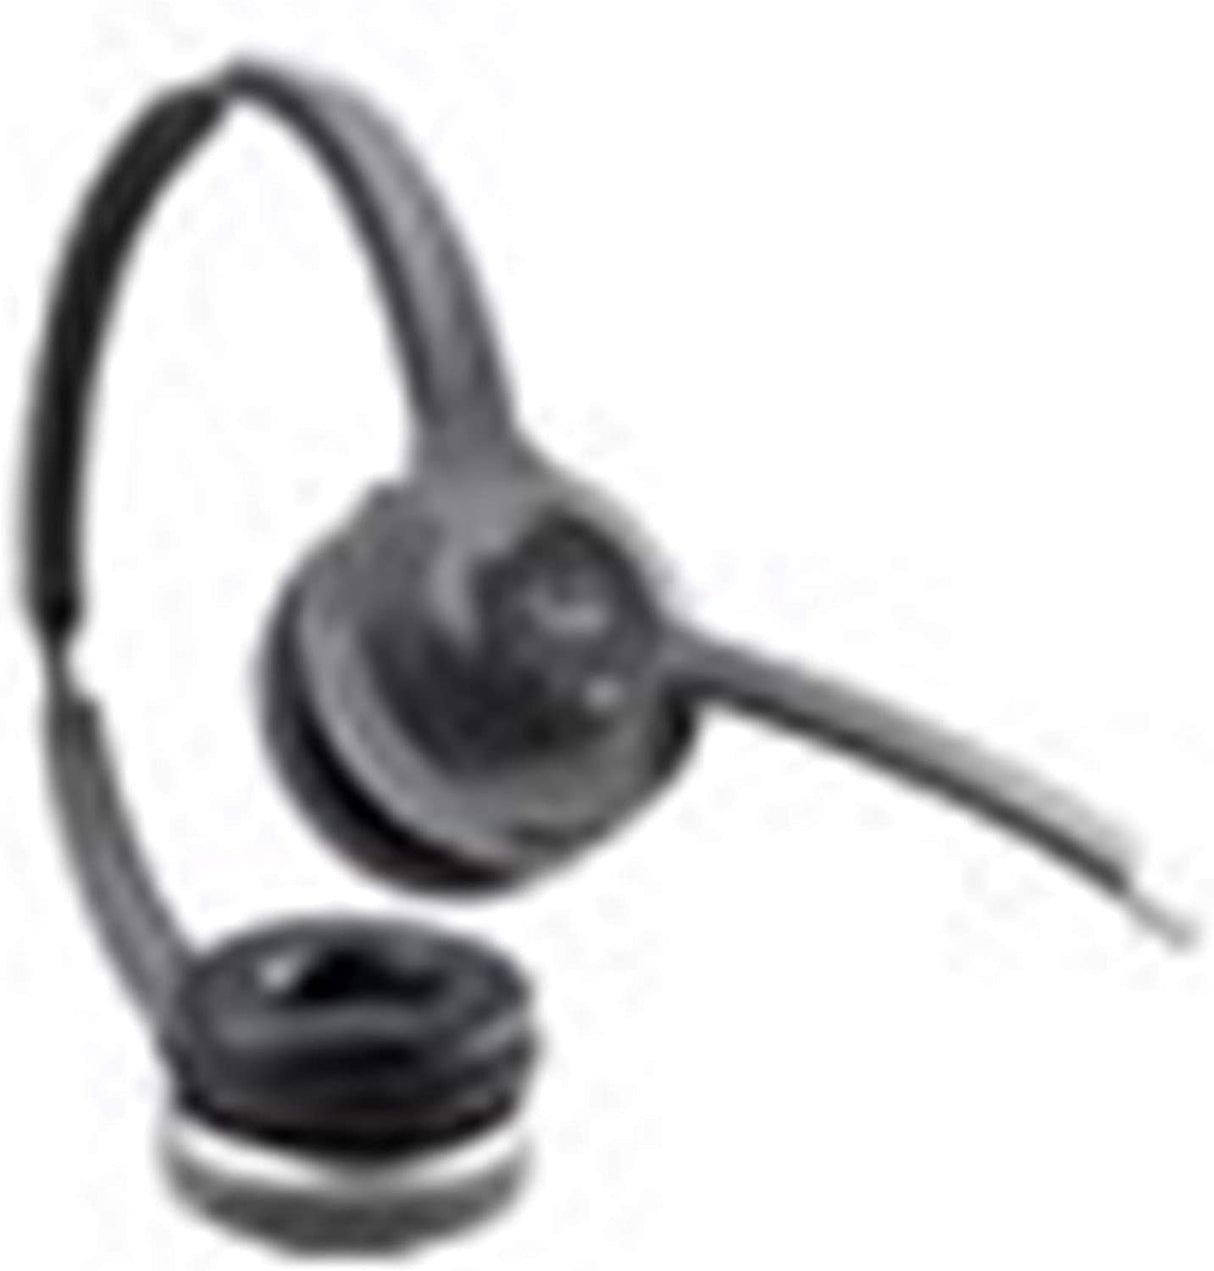 Cisco Headset 561, Wireless Dual On-Ear DECT Headset with Standard Base for US &amp; Canada, Charcoal, 1-Year Limited Liability Warranty (CP-HS-WL-562-S-US=)